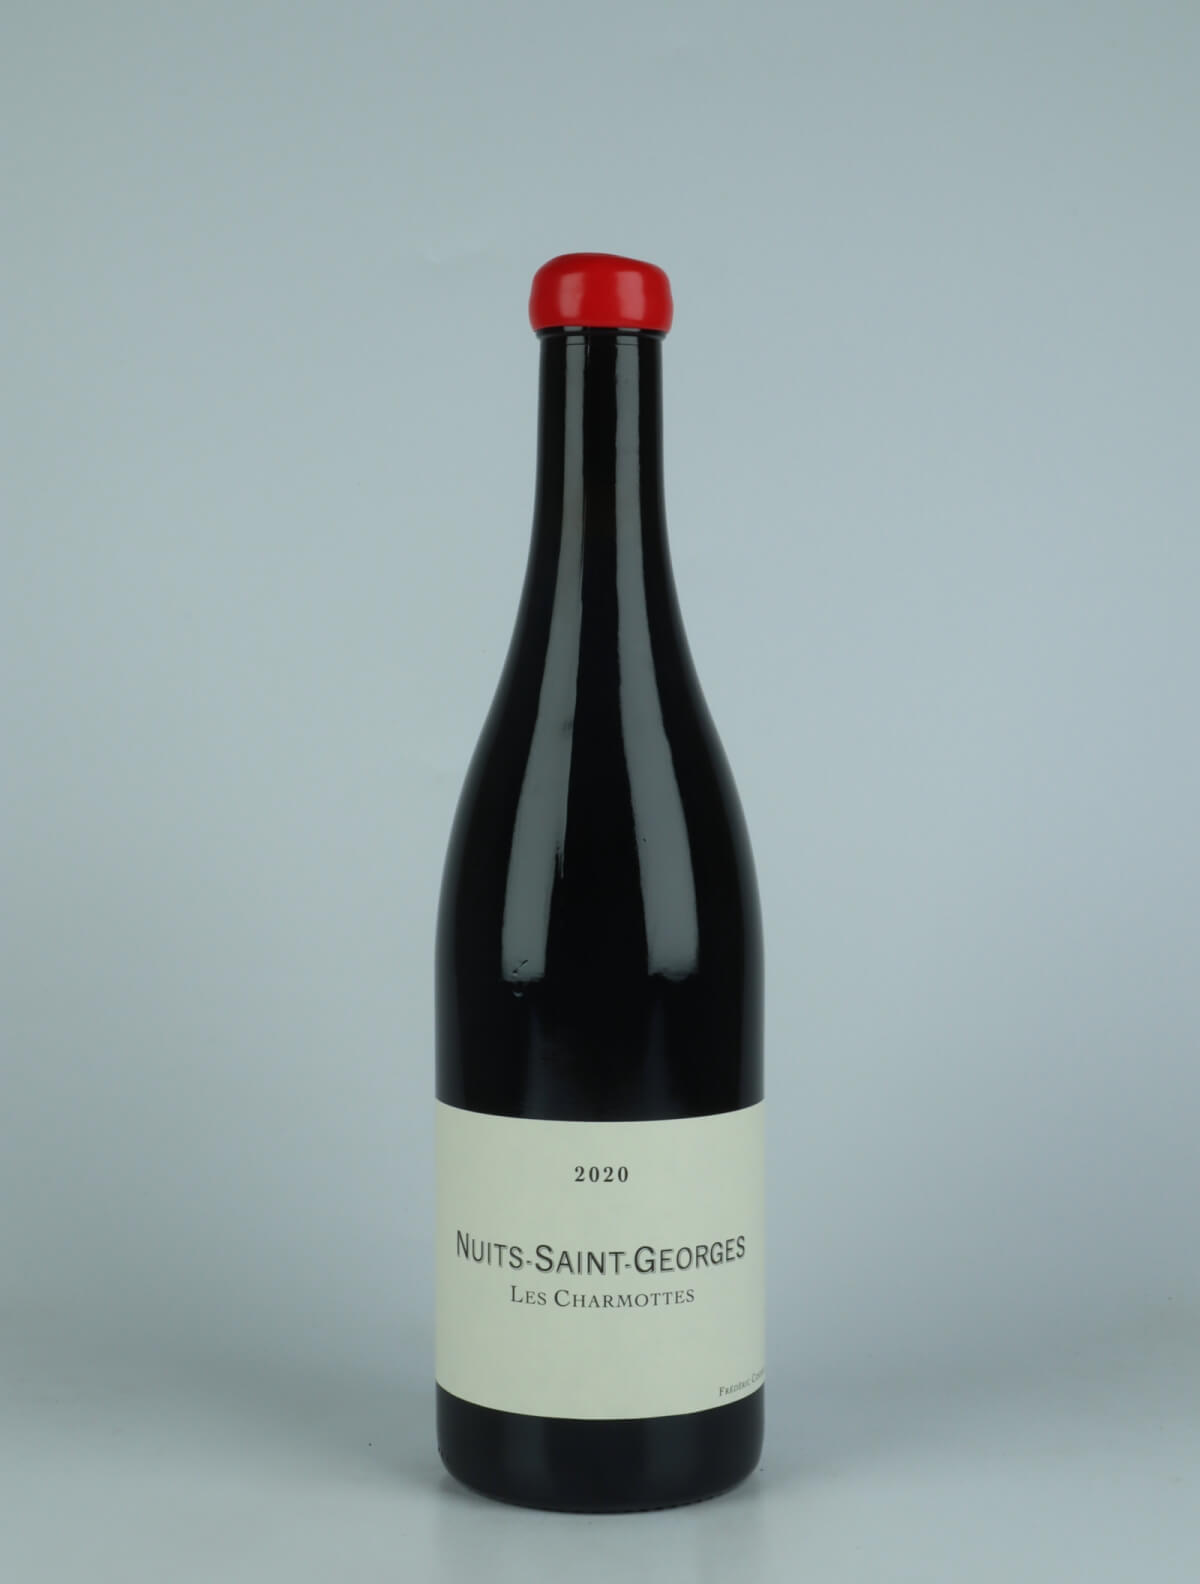 A bottle 2020 Nuits Saint Georges - Les Charmottes Red wine from Frédéric Cossard, Burgundy in France